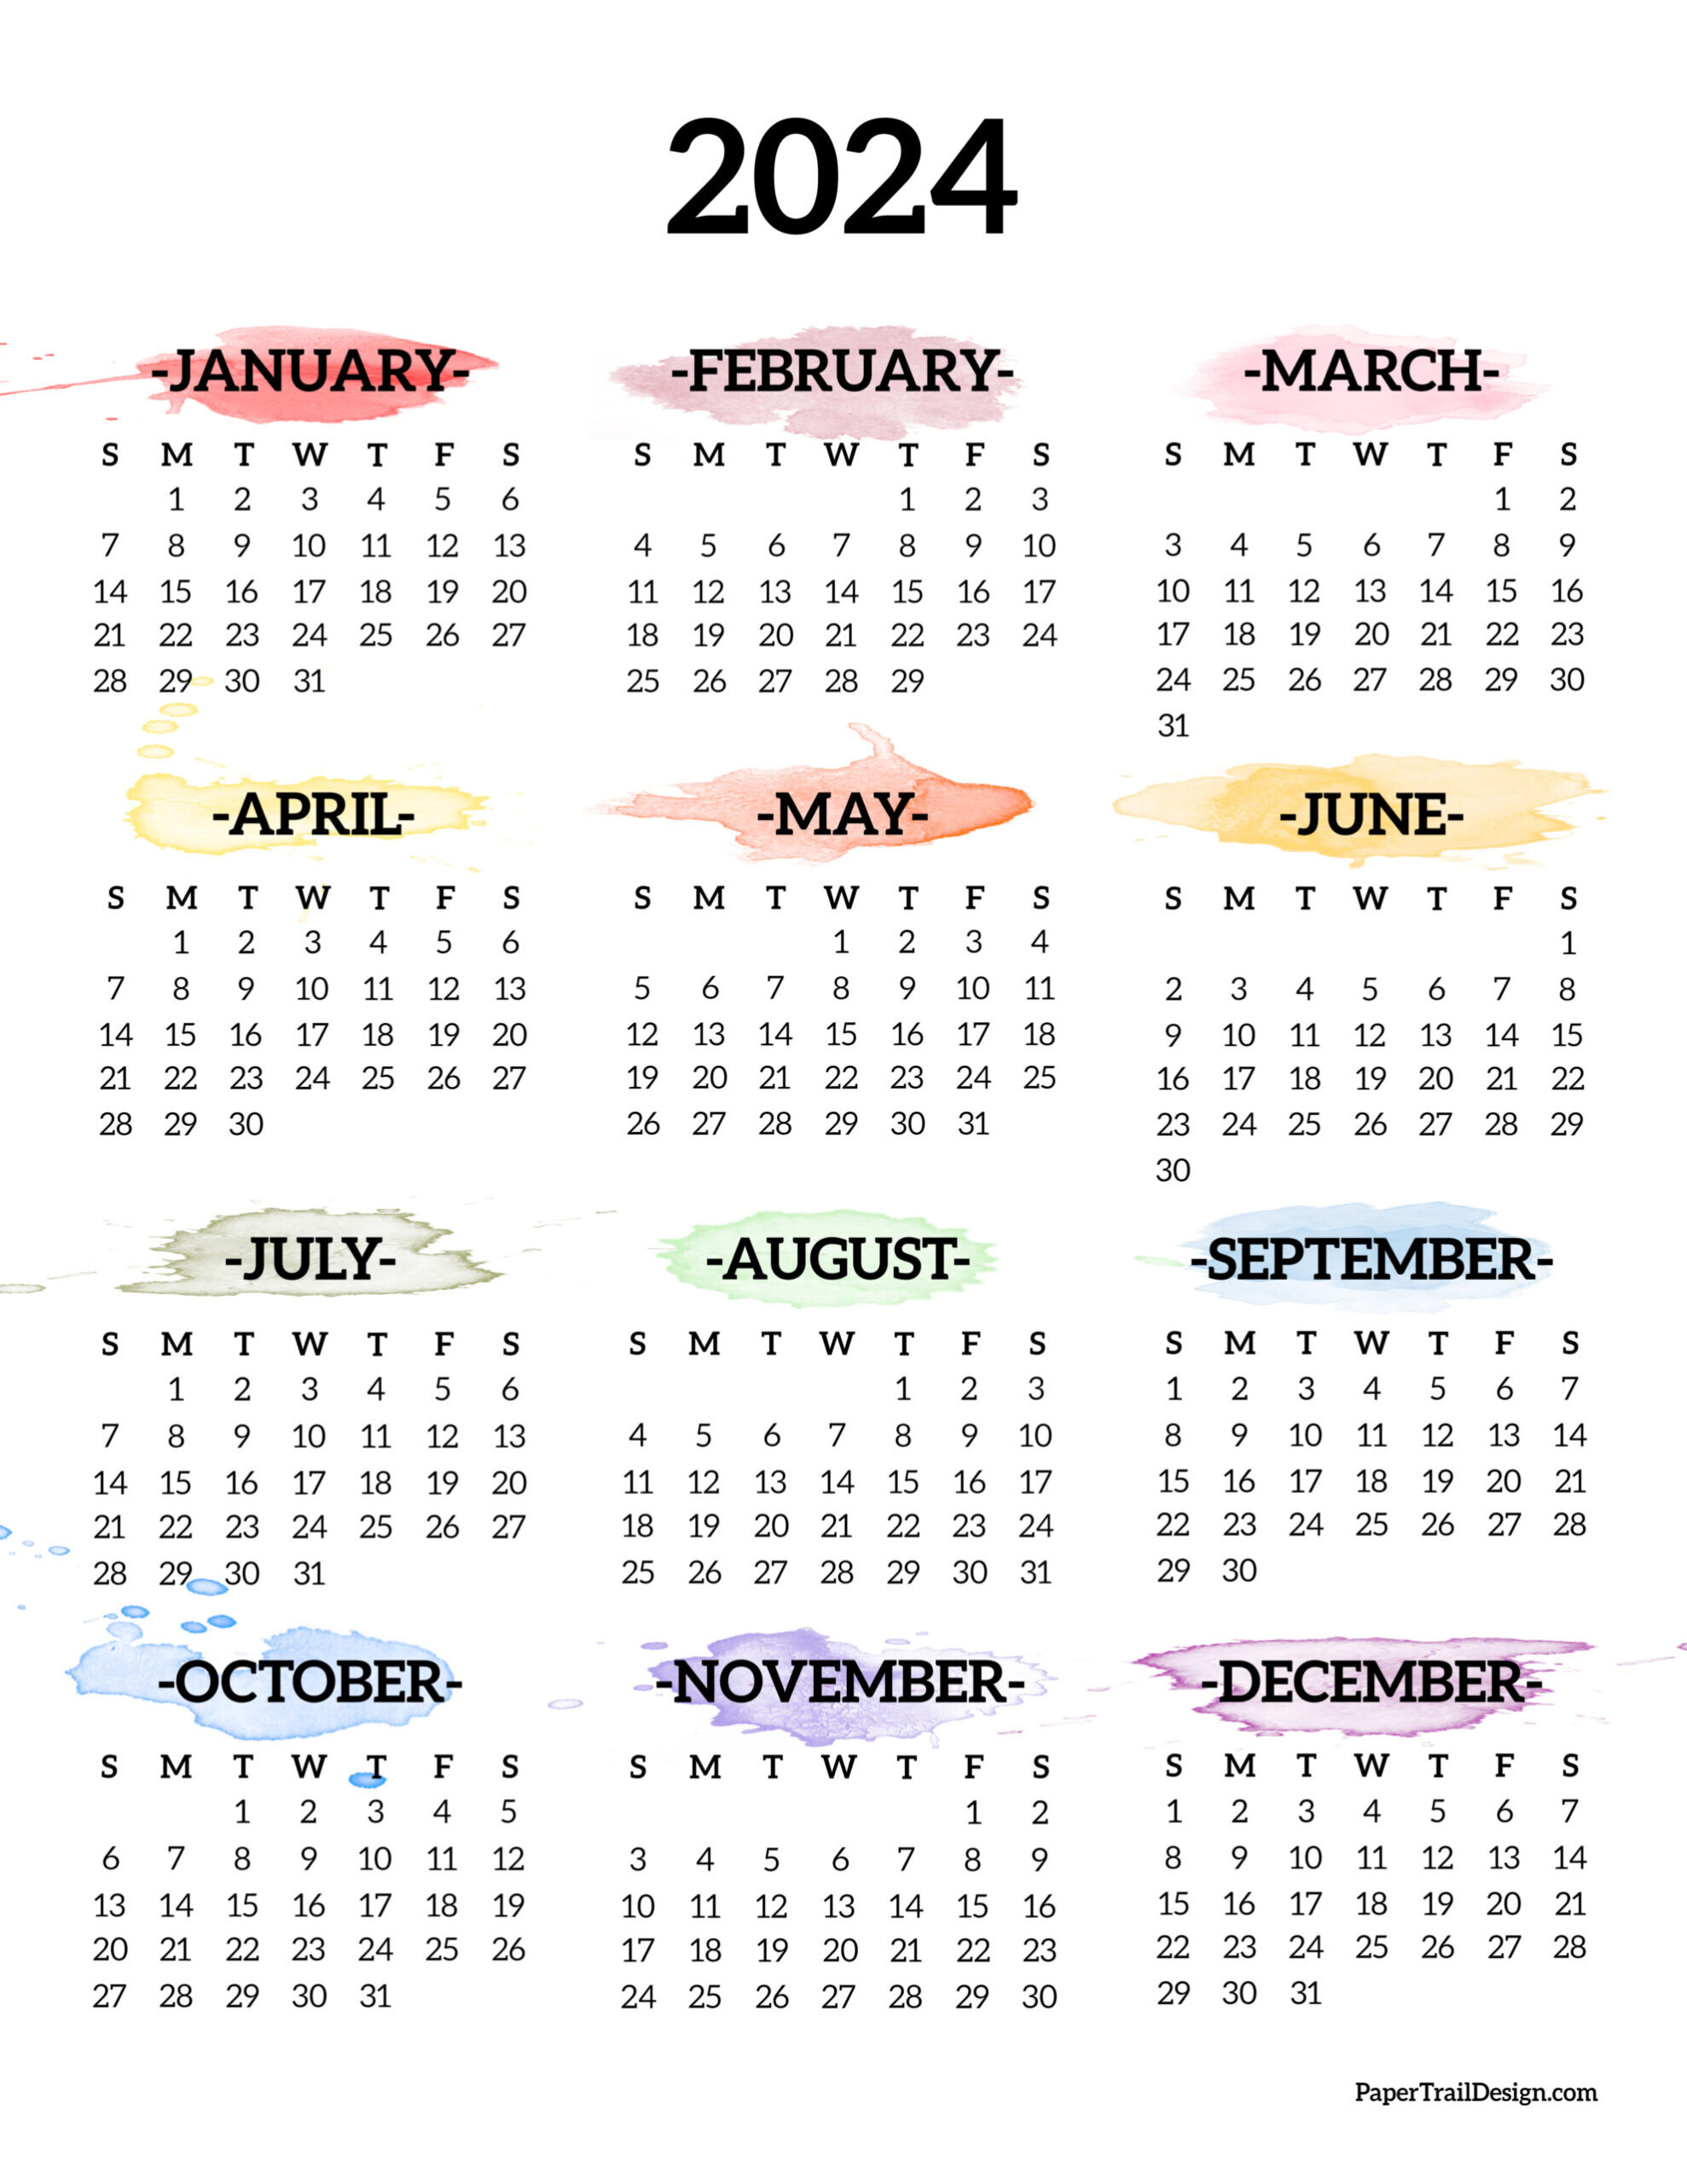 Calendar 2024 Printable One Page - Paper Trail Design | Printable 2024 Calendar One Page